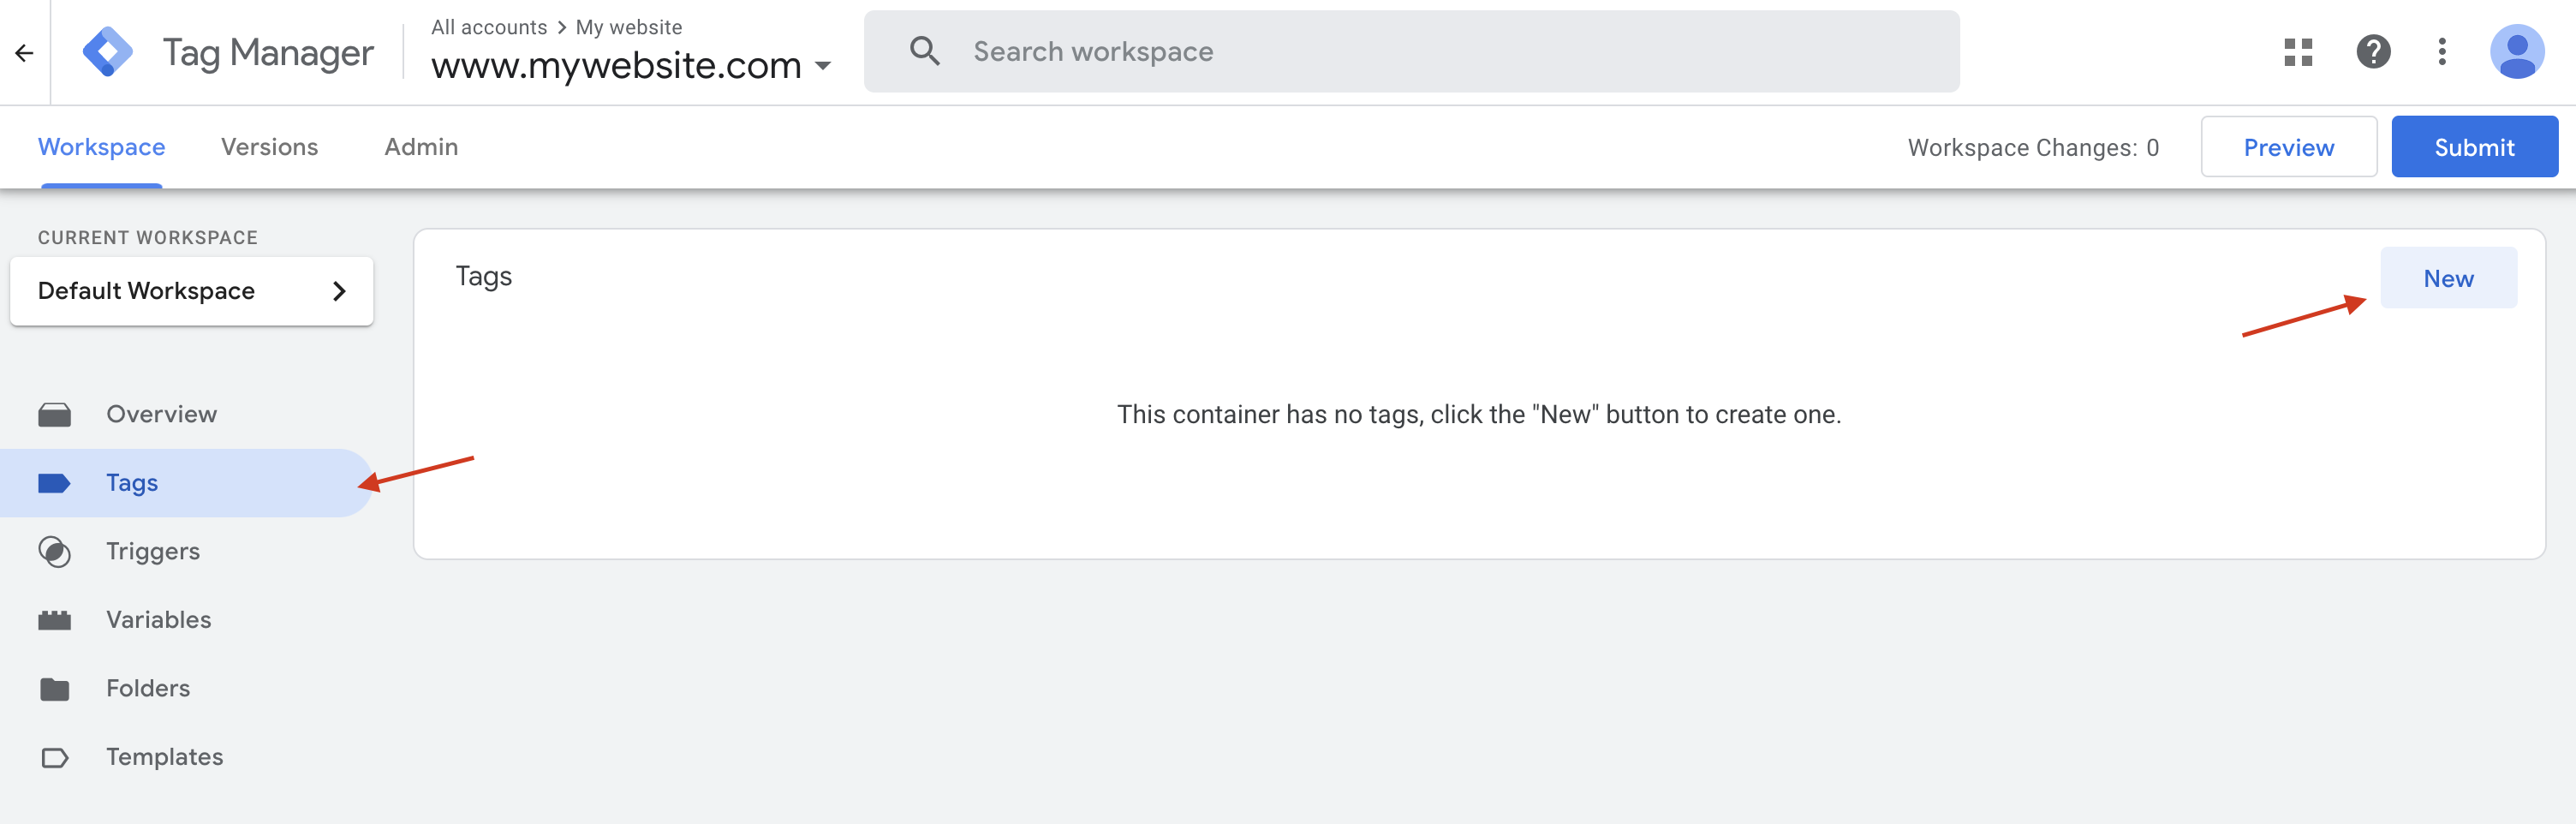 Google Tag Manager new trigger